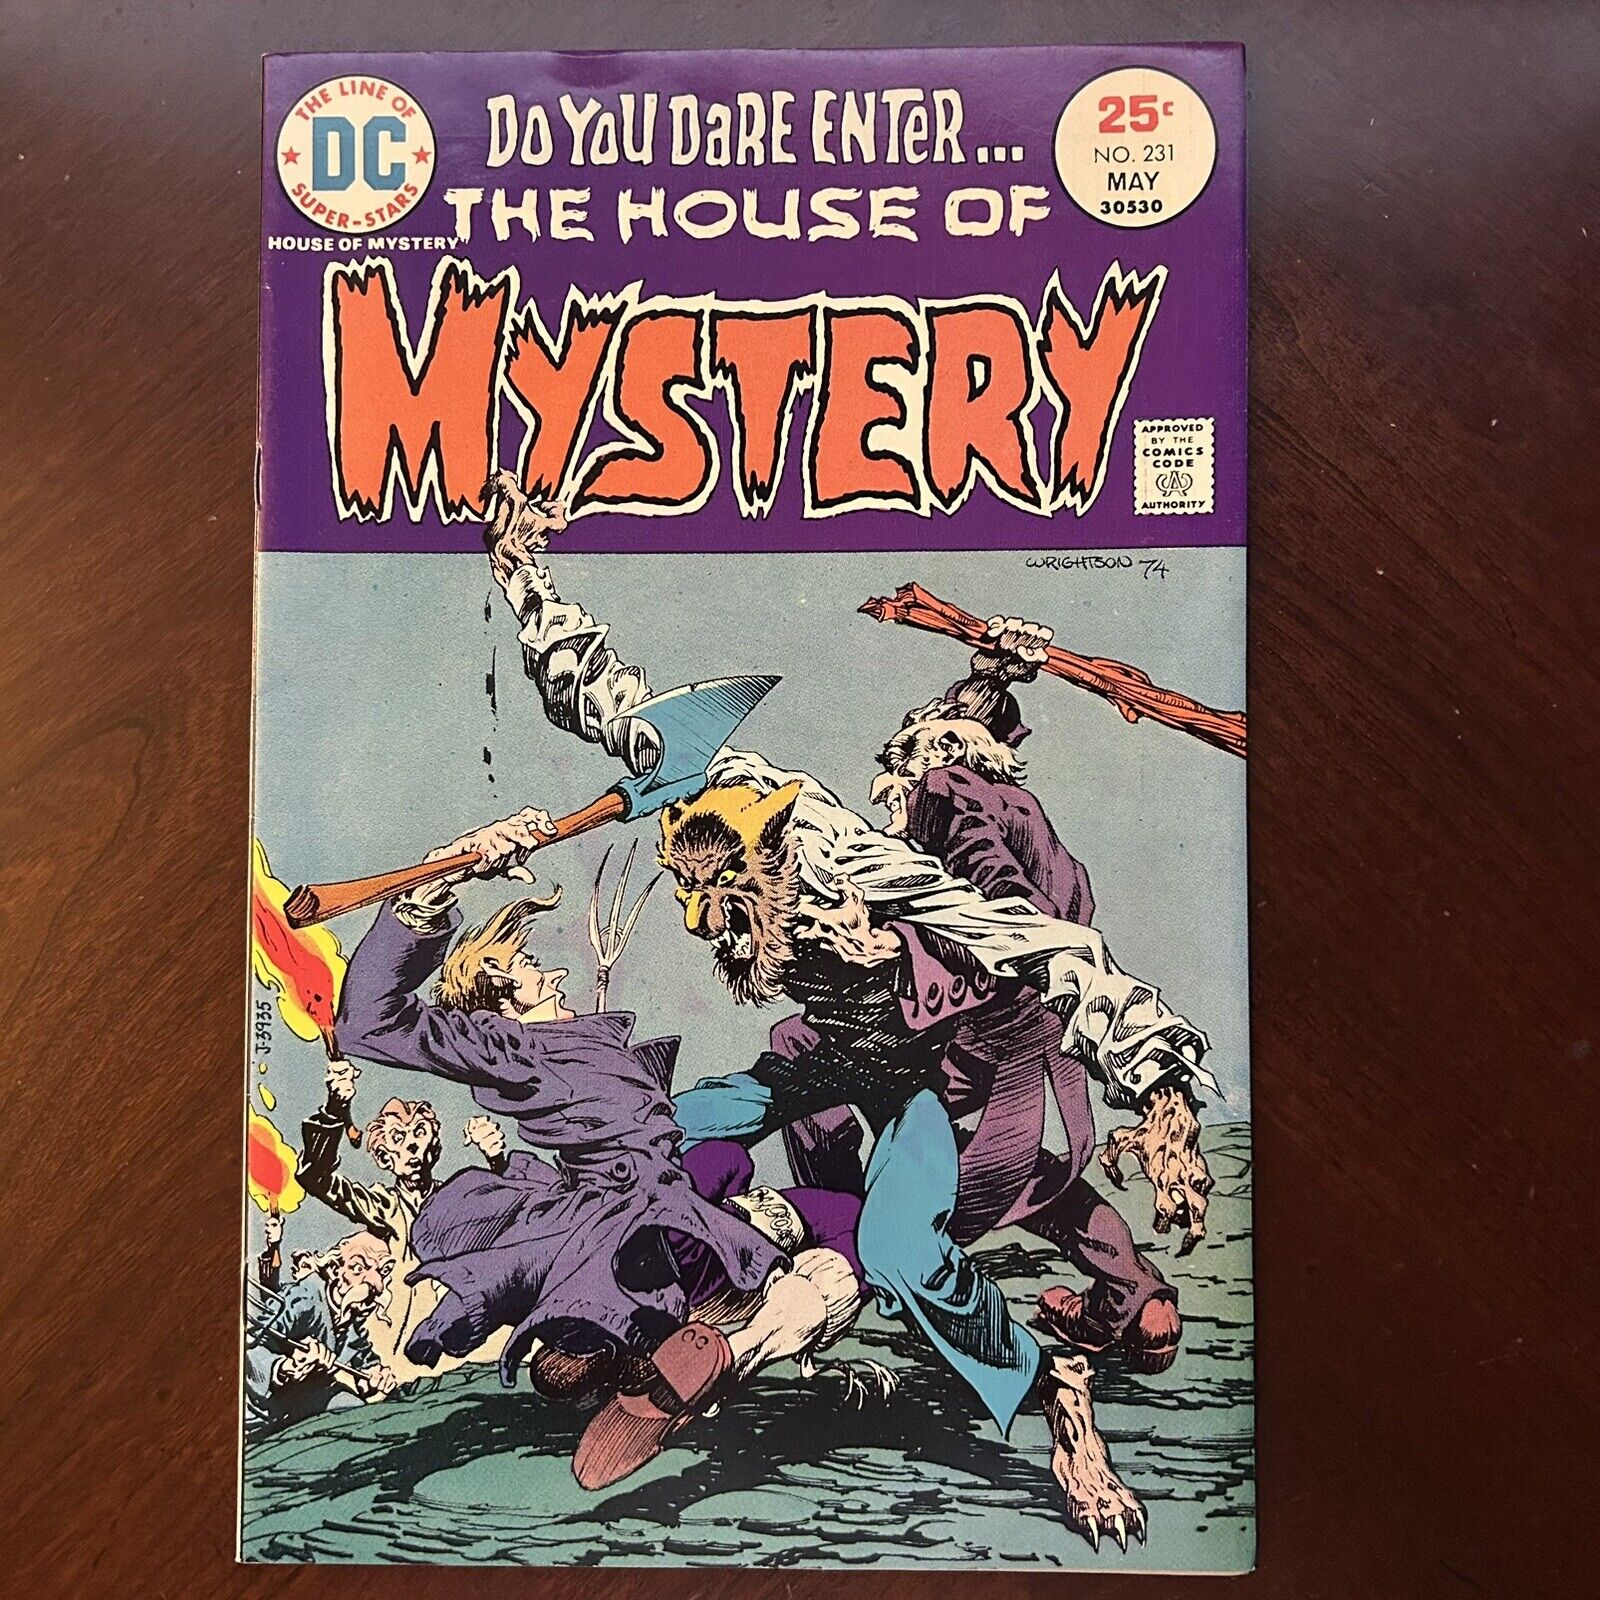 HOUSE OF MYSTERY No. 231 May 1975 DC Comics Wrightson Cover VF